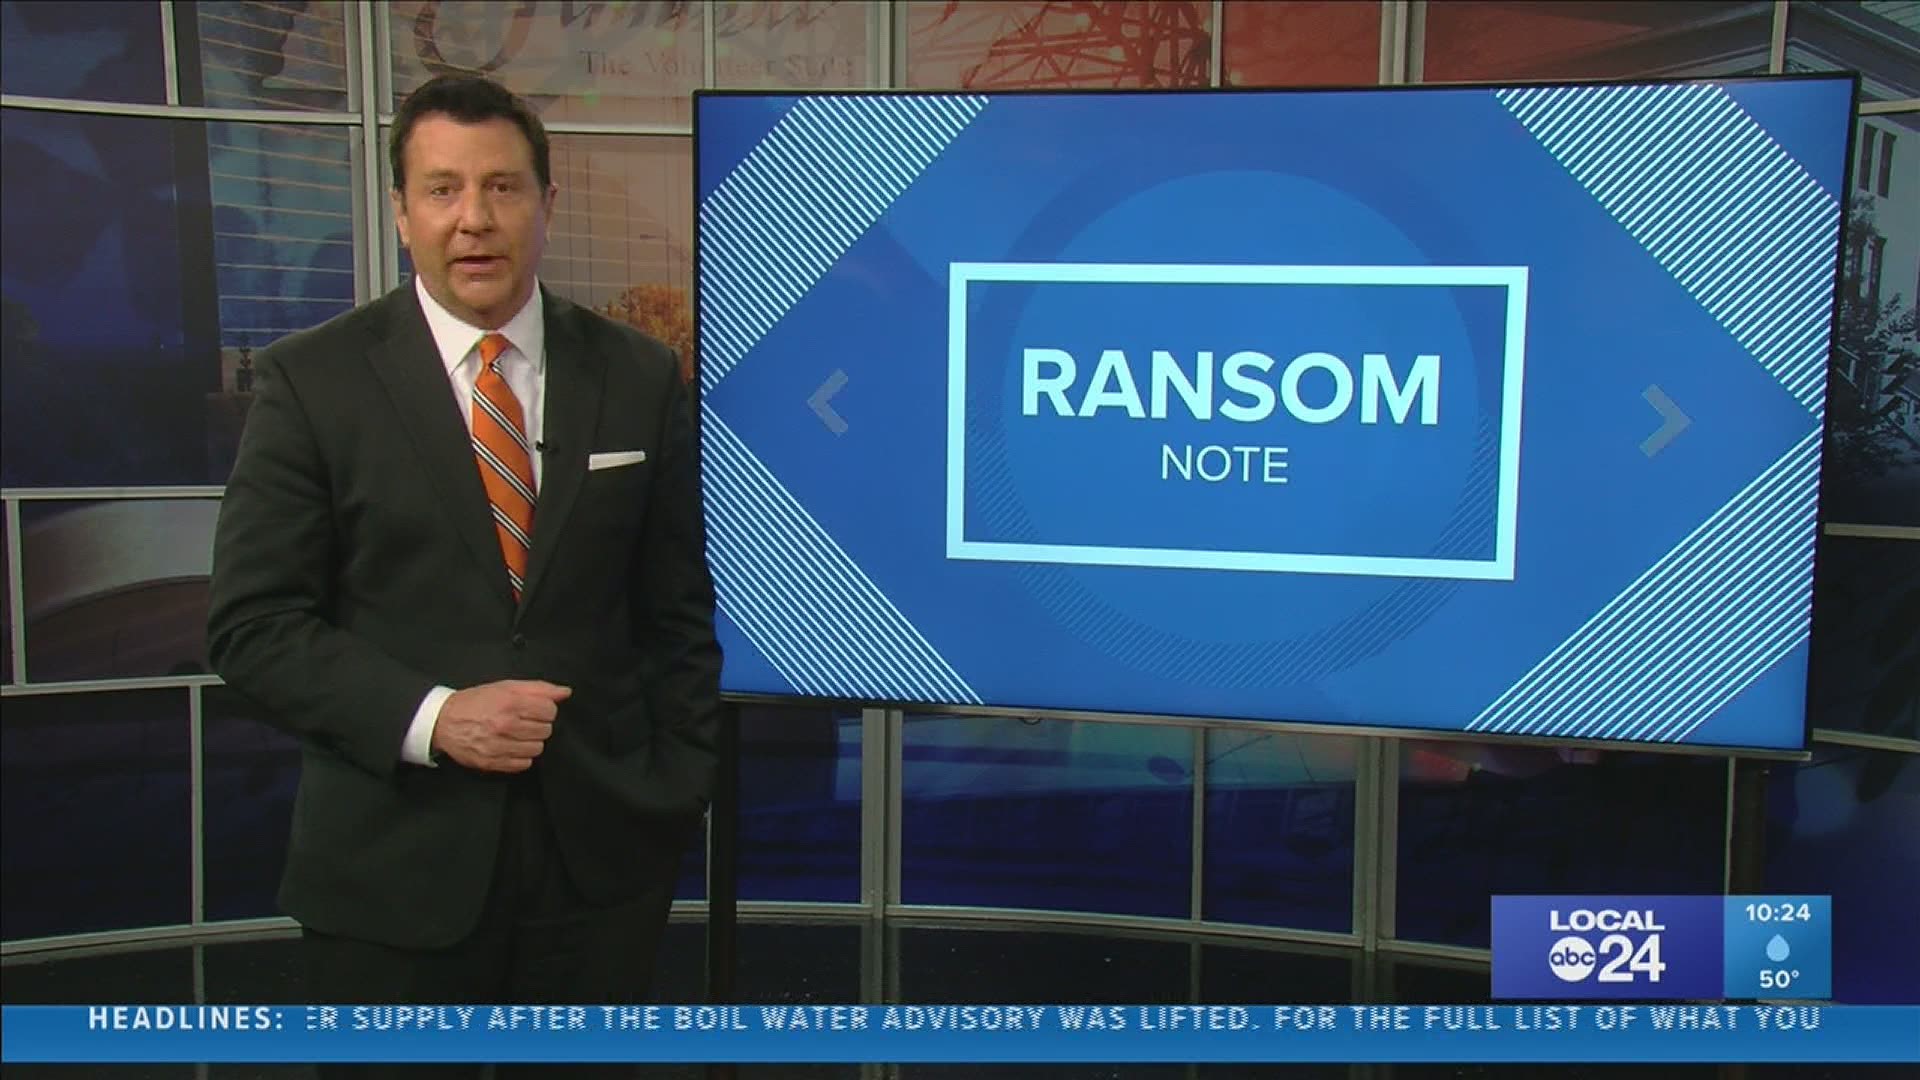 In his Ransom Note, Local 24 News Anchor Richard Ransom discusses the fallout from thousands of wasted COVID-19 vaccines in Shelby County